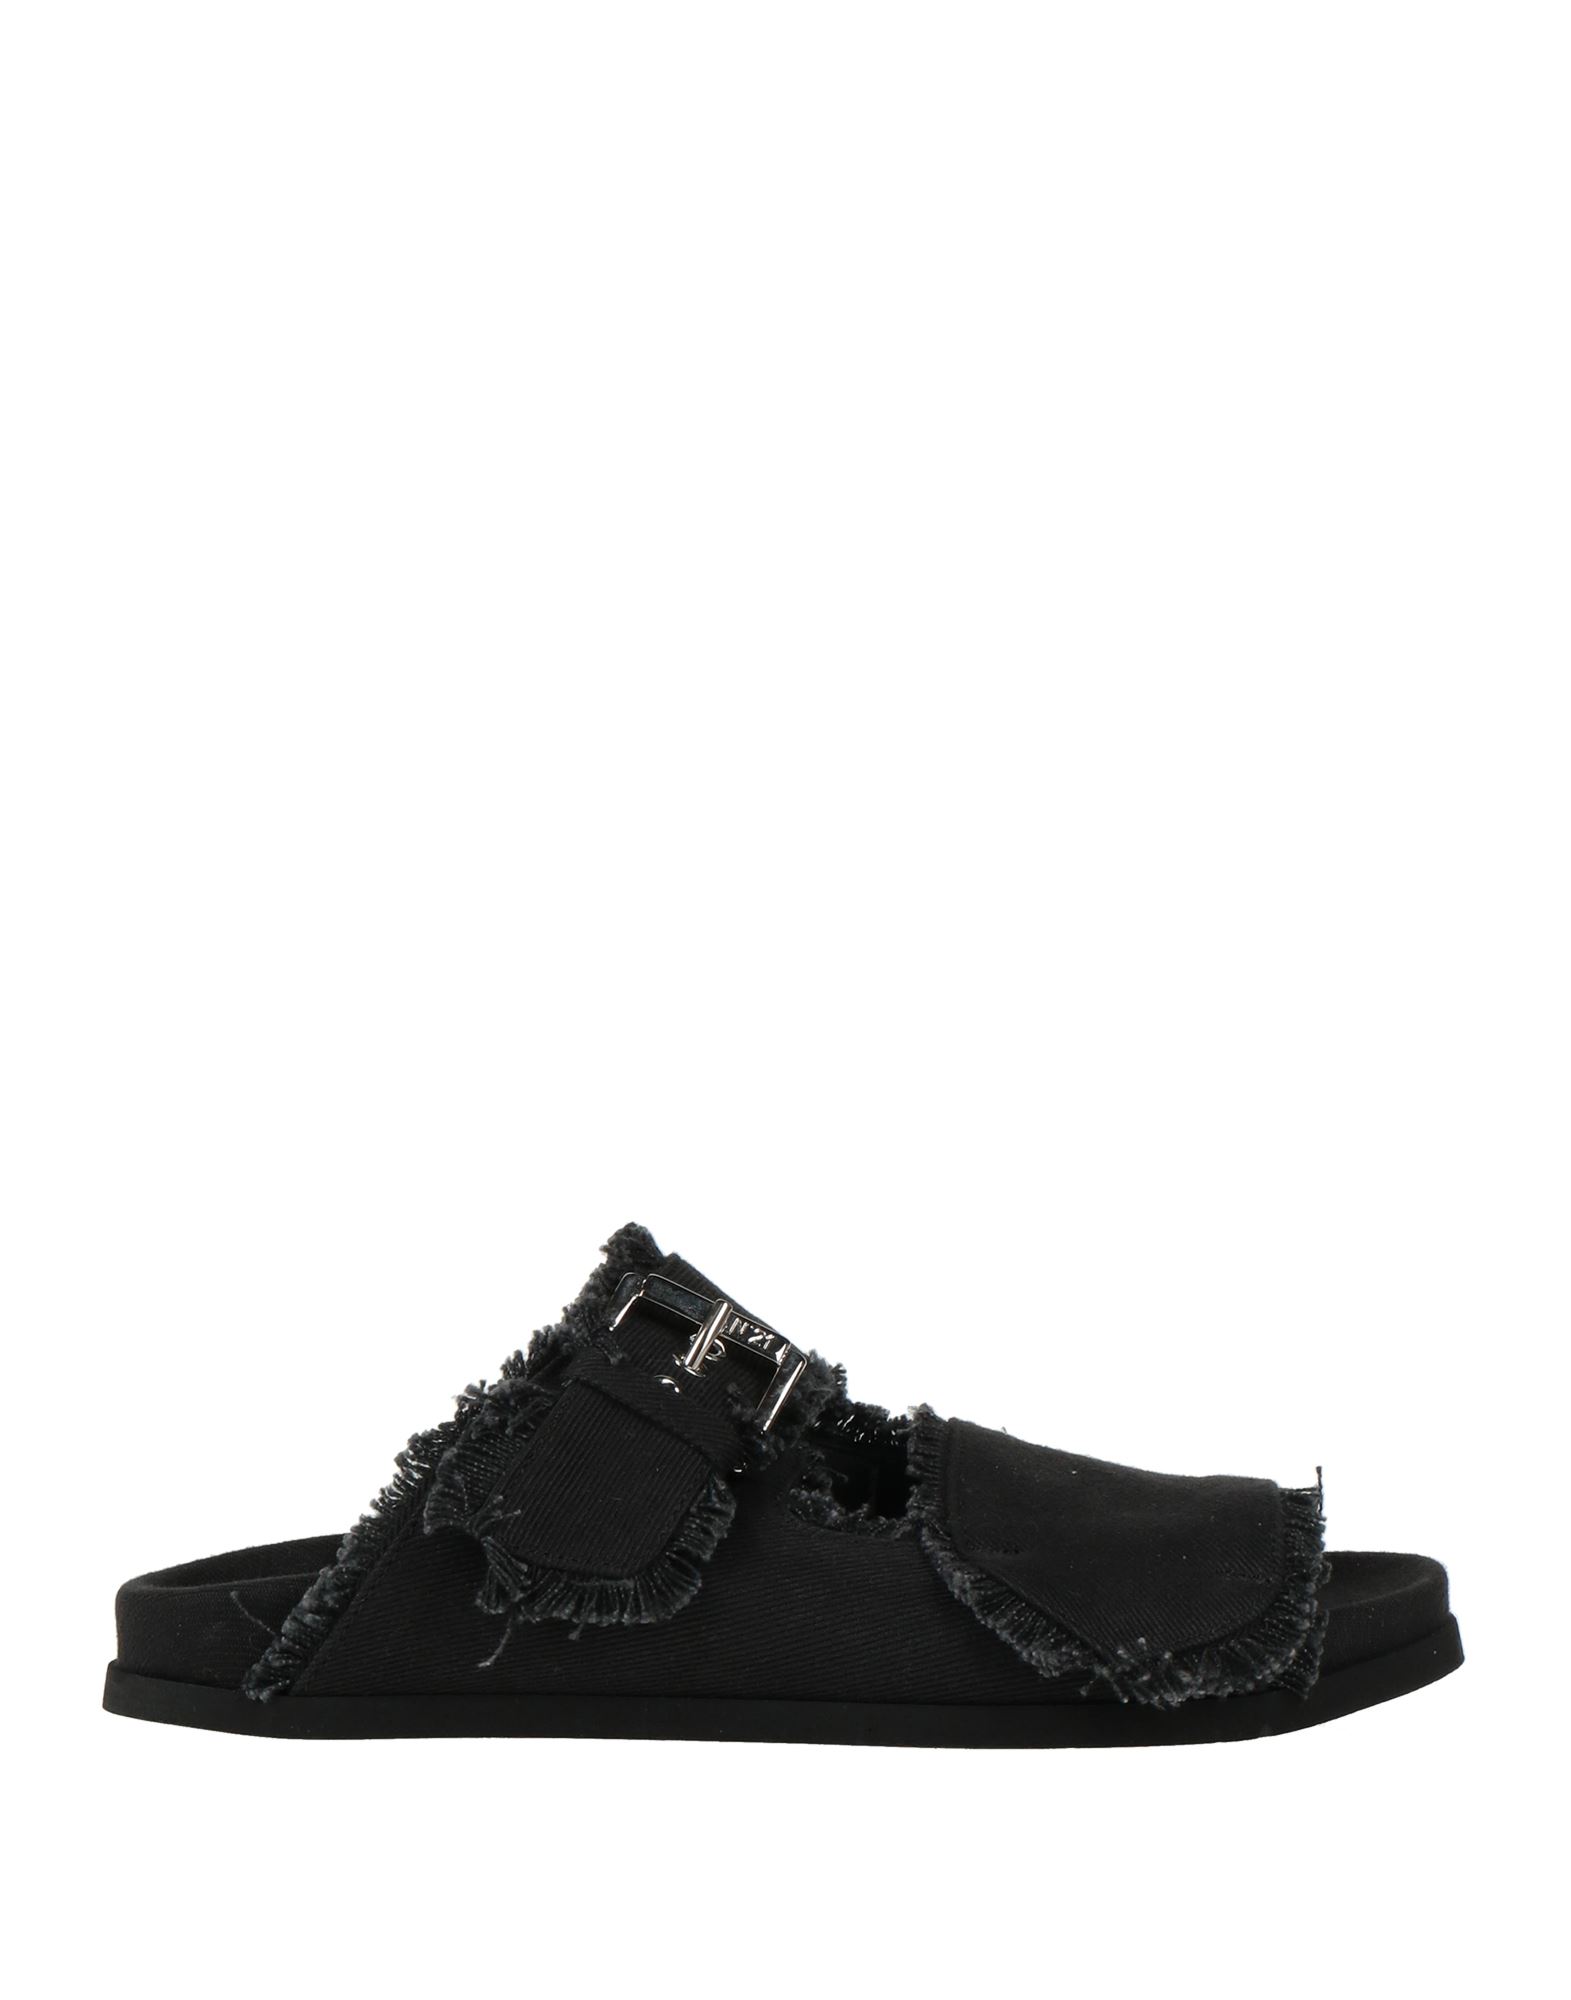 Ndegree21 Sandals In Black